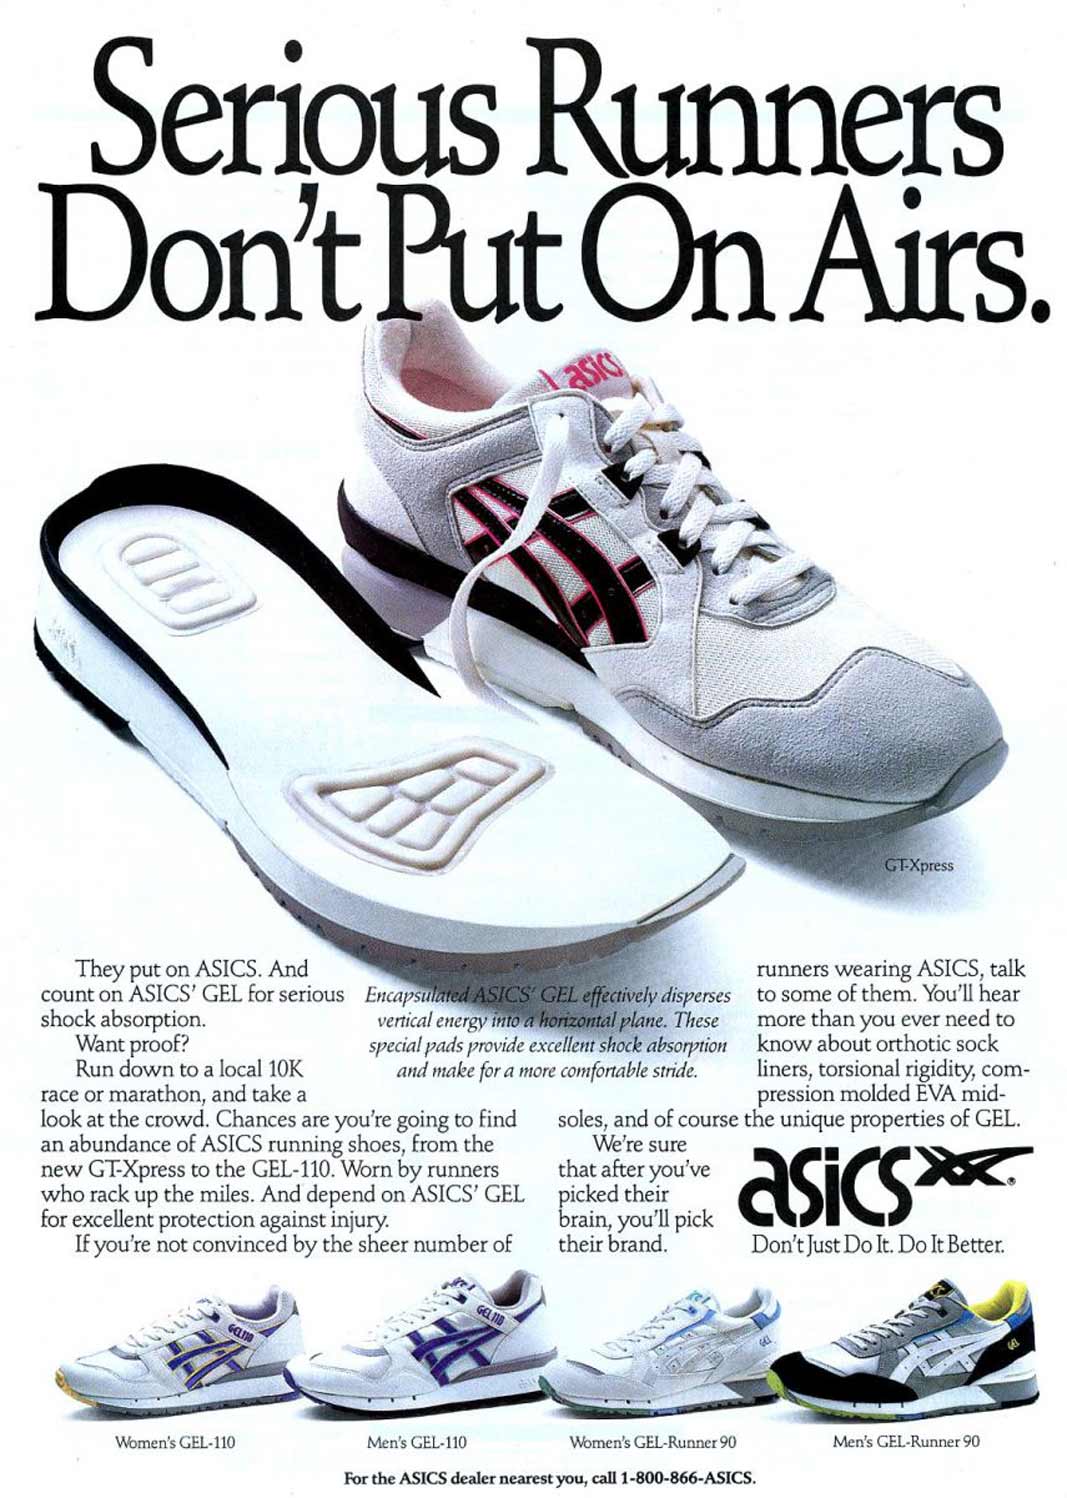 The 10 best sneakers ad campaigns